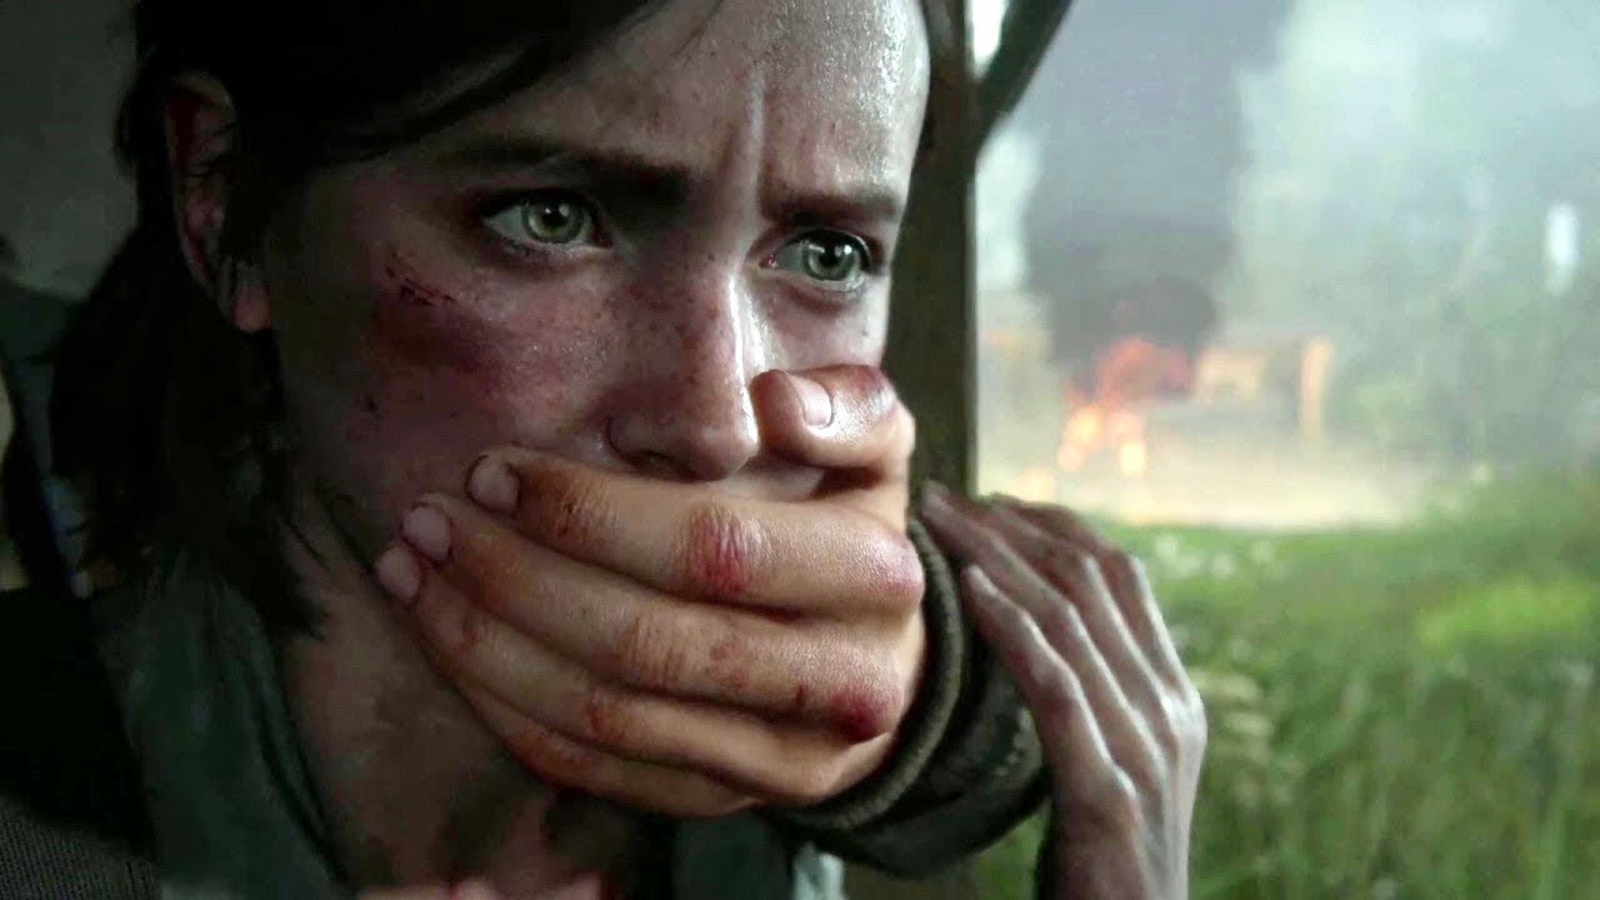 The Last of Us Part 2 To Release In Early 2020 - Rumor